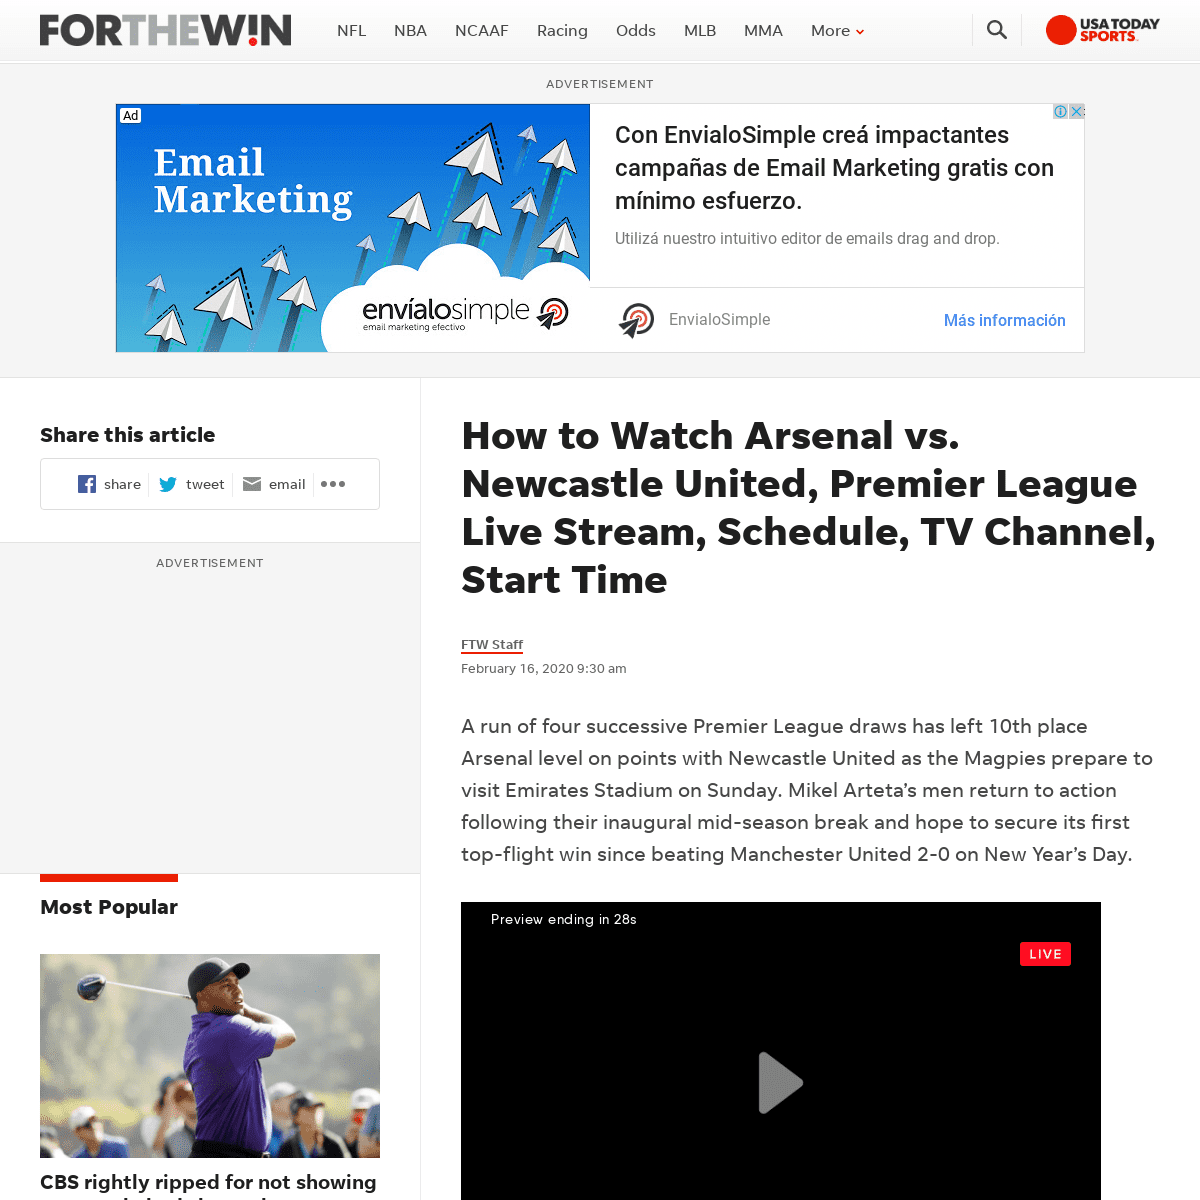 A complete backup of ftw.usatoday.com/2020/02/how-to-watch-arsenal-vs-newcastle-united-premier-league-live-stream-schedule-tv-ch